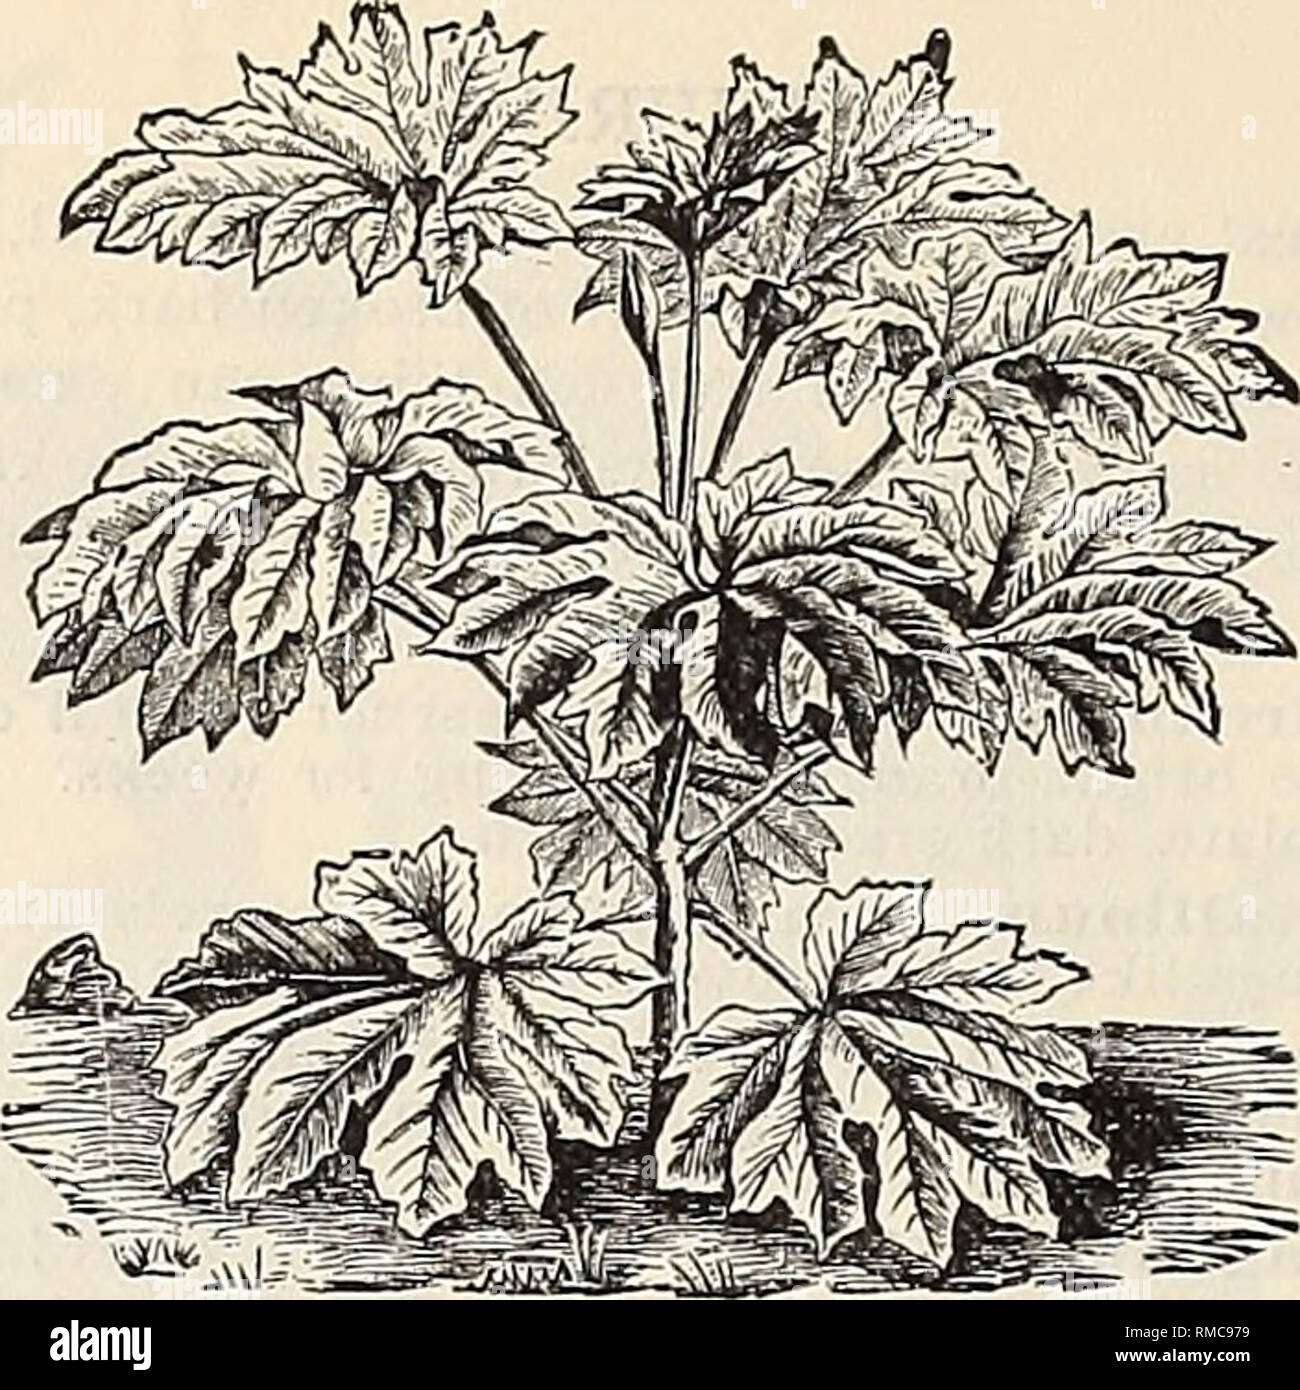 . Annual illustrated and descriptive catalogue of new, rare and beautiful plants and seeds. Nurseries (Horticulture) Florida Catalogs; Plants, Ornamental Catalogs; Flowers Catalogs; Tropical plants Catalogs; Fruit trees Seedlings Catalogs. 5° THE AMERICAN EXOTIC NURSERIES, SEVEN OAKS, FLORIDA.. ARALIA. ARALIA. Exceedingly ornamental plants for greenhouse culture, and for open ground in South Florida. A. fllicifolia. Leaves fern-like ; petioles marked with oblong white spots. 50 cts. each. A. Guifoylei. A very handsome species, with variegated foliage. A rapid grower, and one of the most showy  Stock Photo